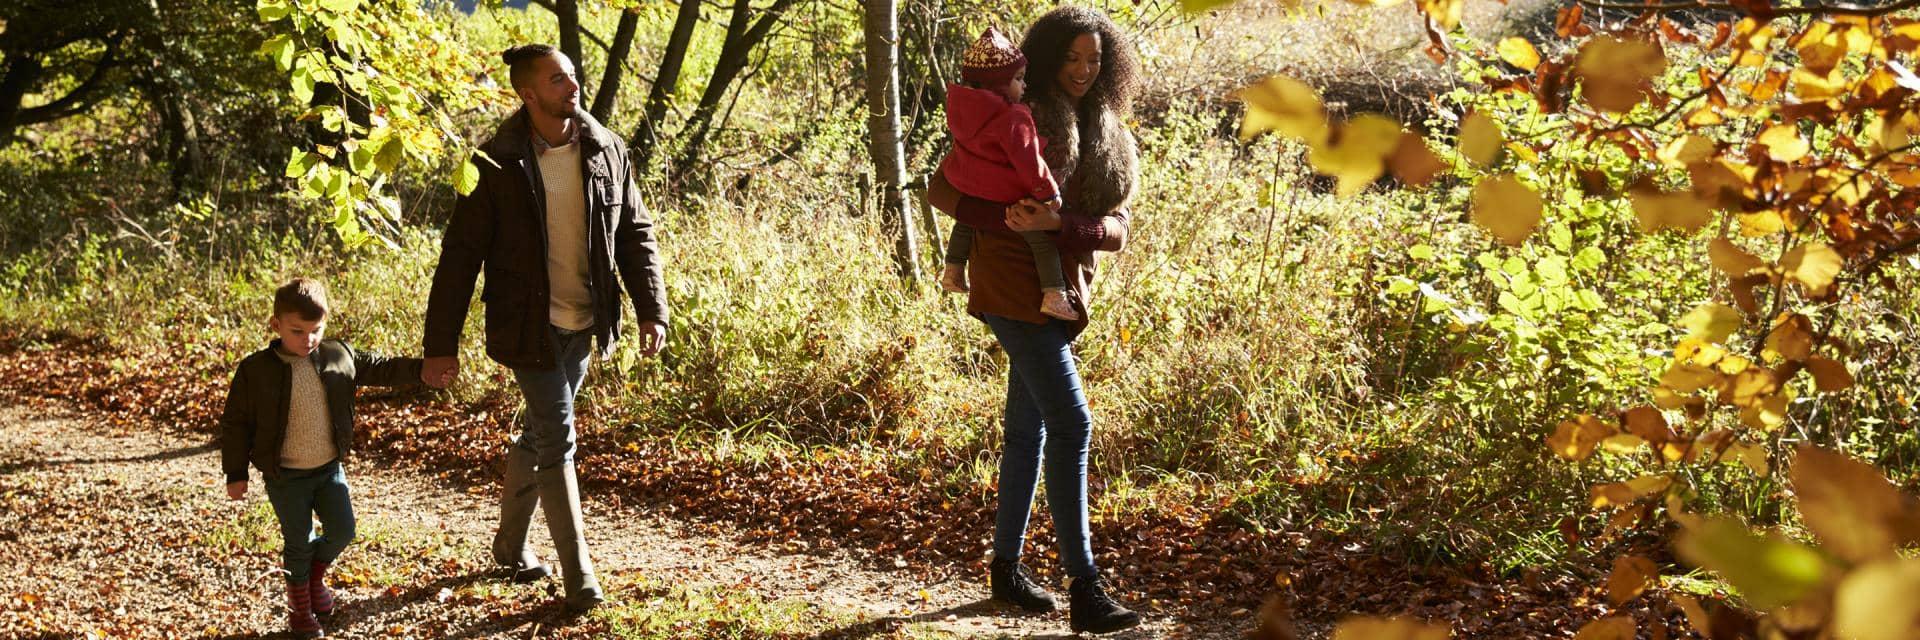  A family with young children take a walk in the woods in autumn
